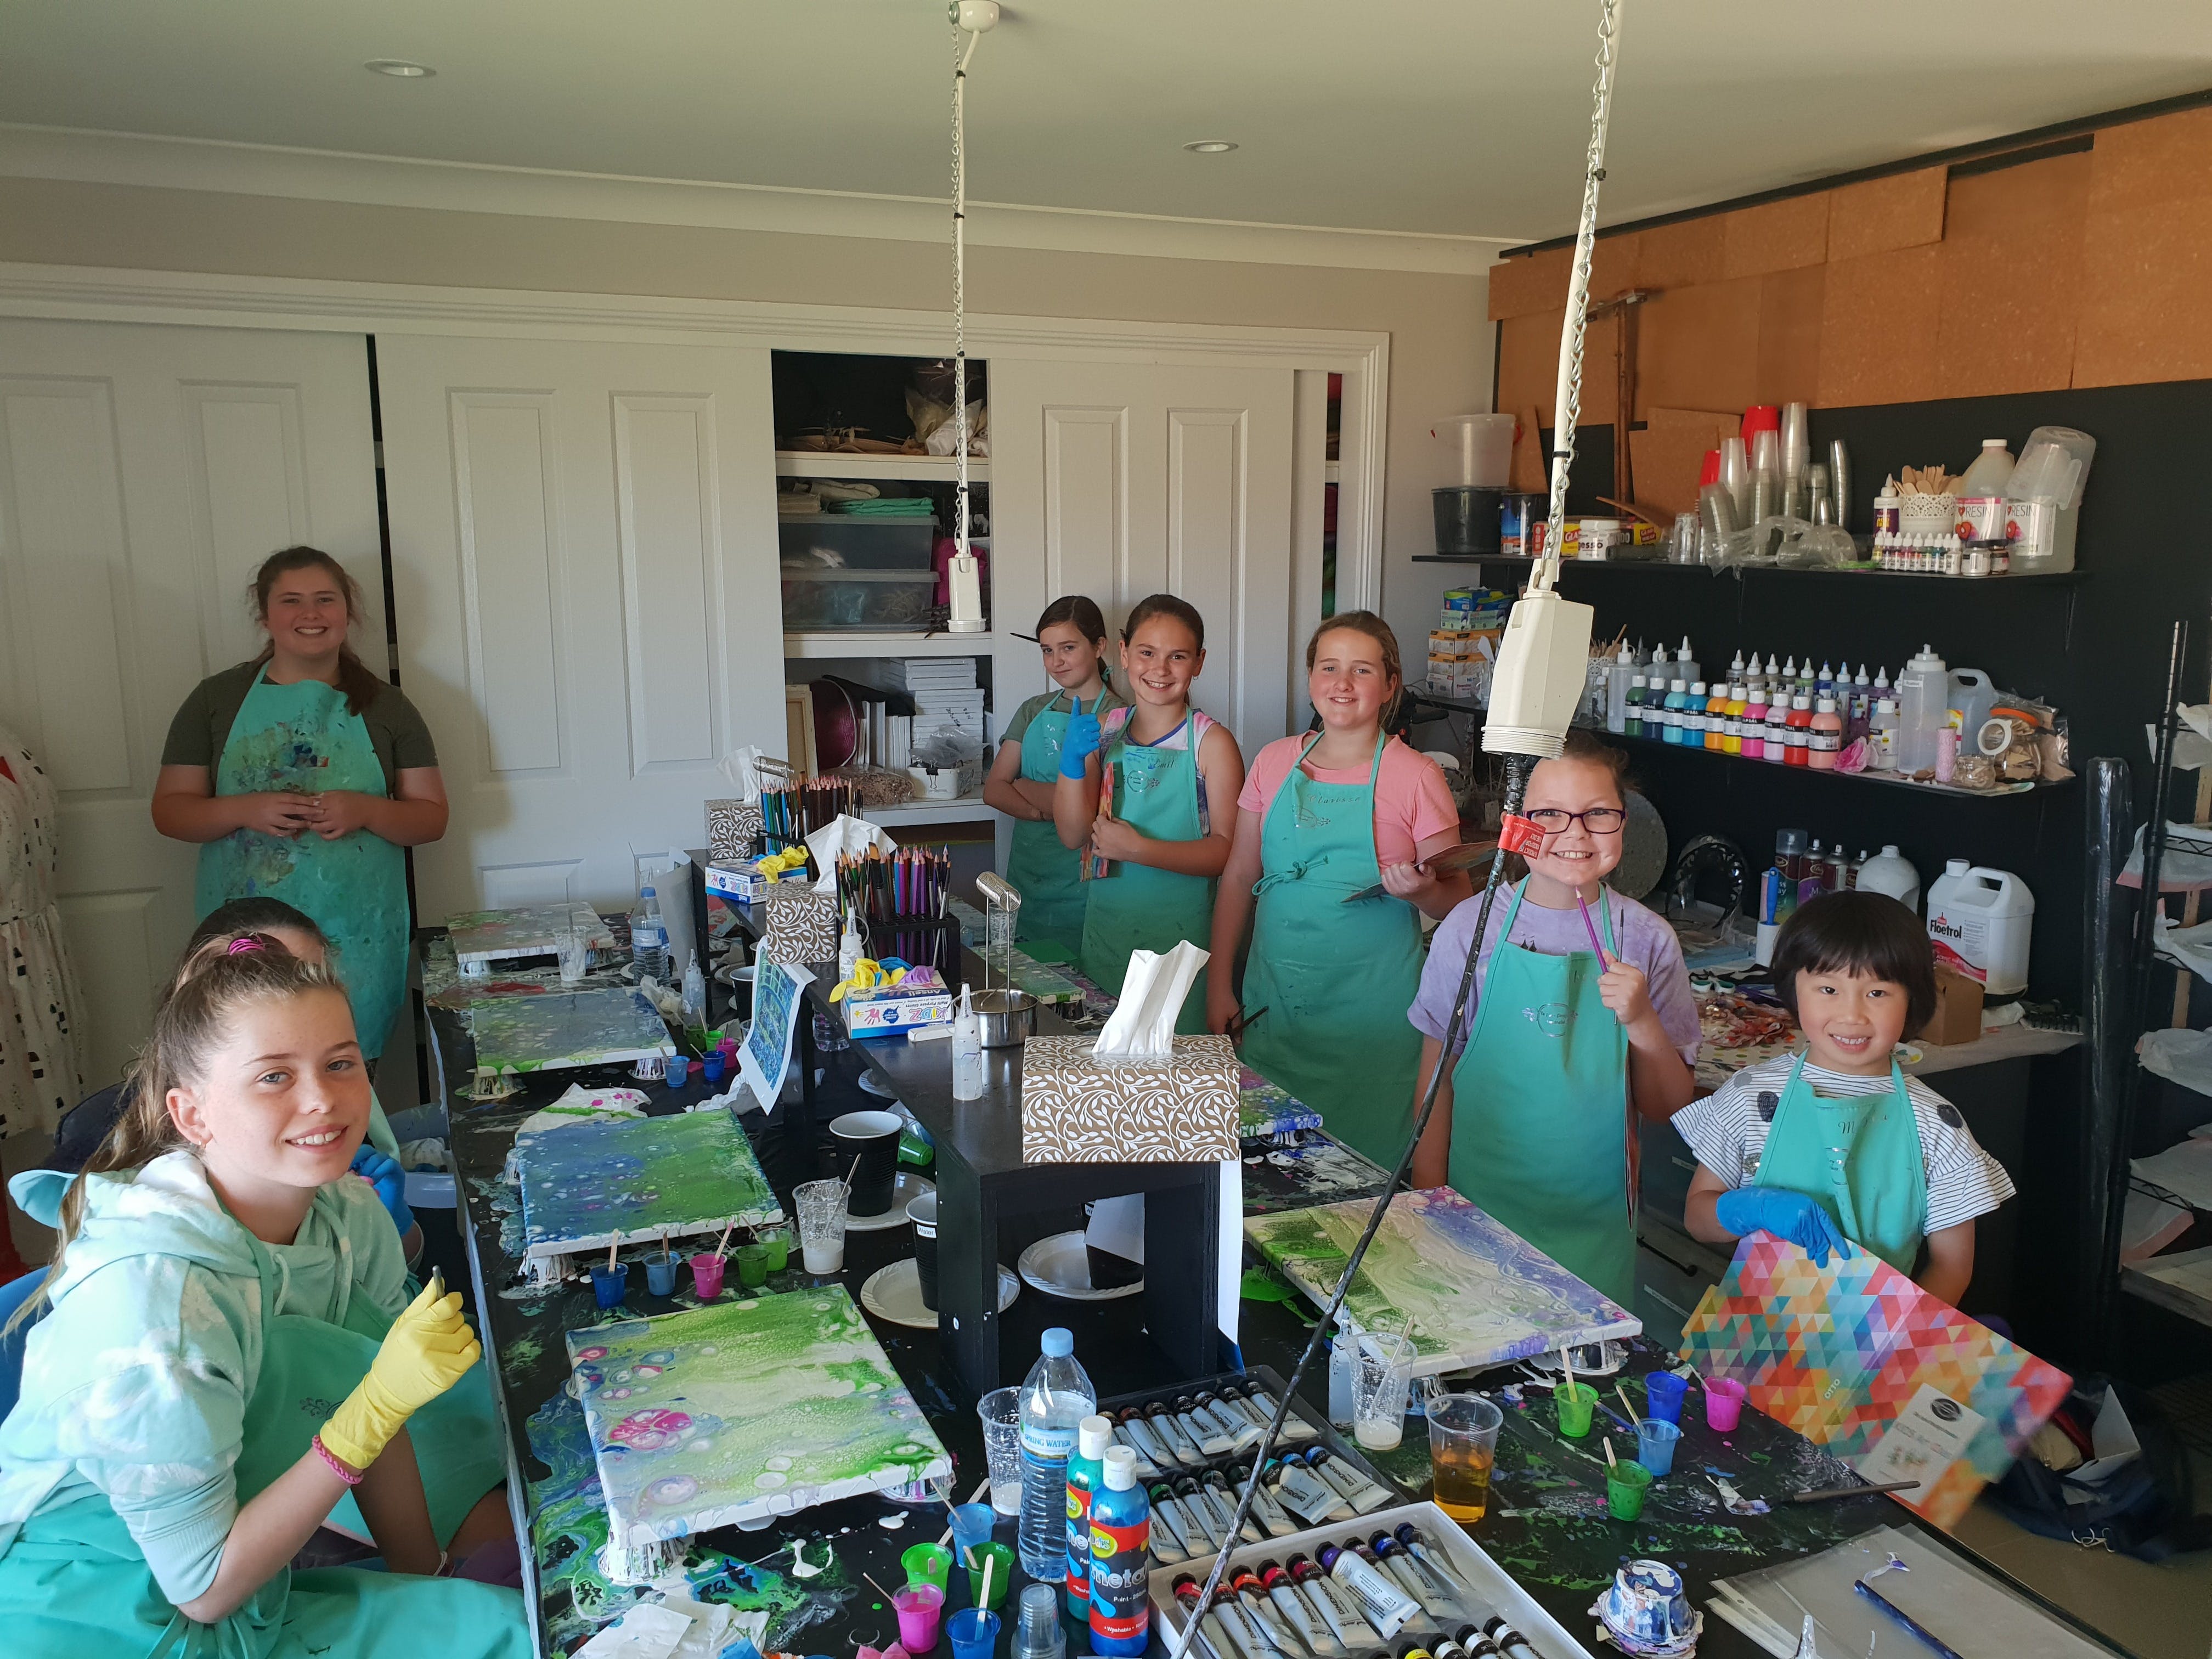 School holidays - Kids art class - Painting - Accommodation Cooktown